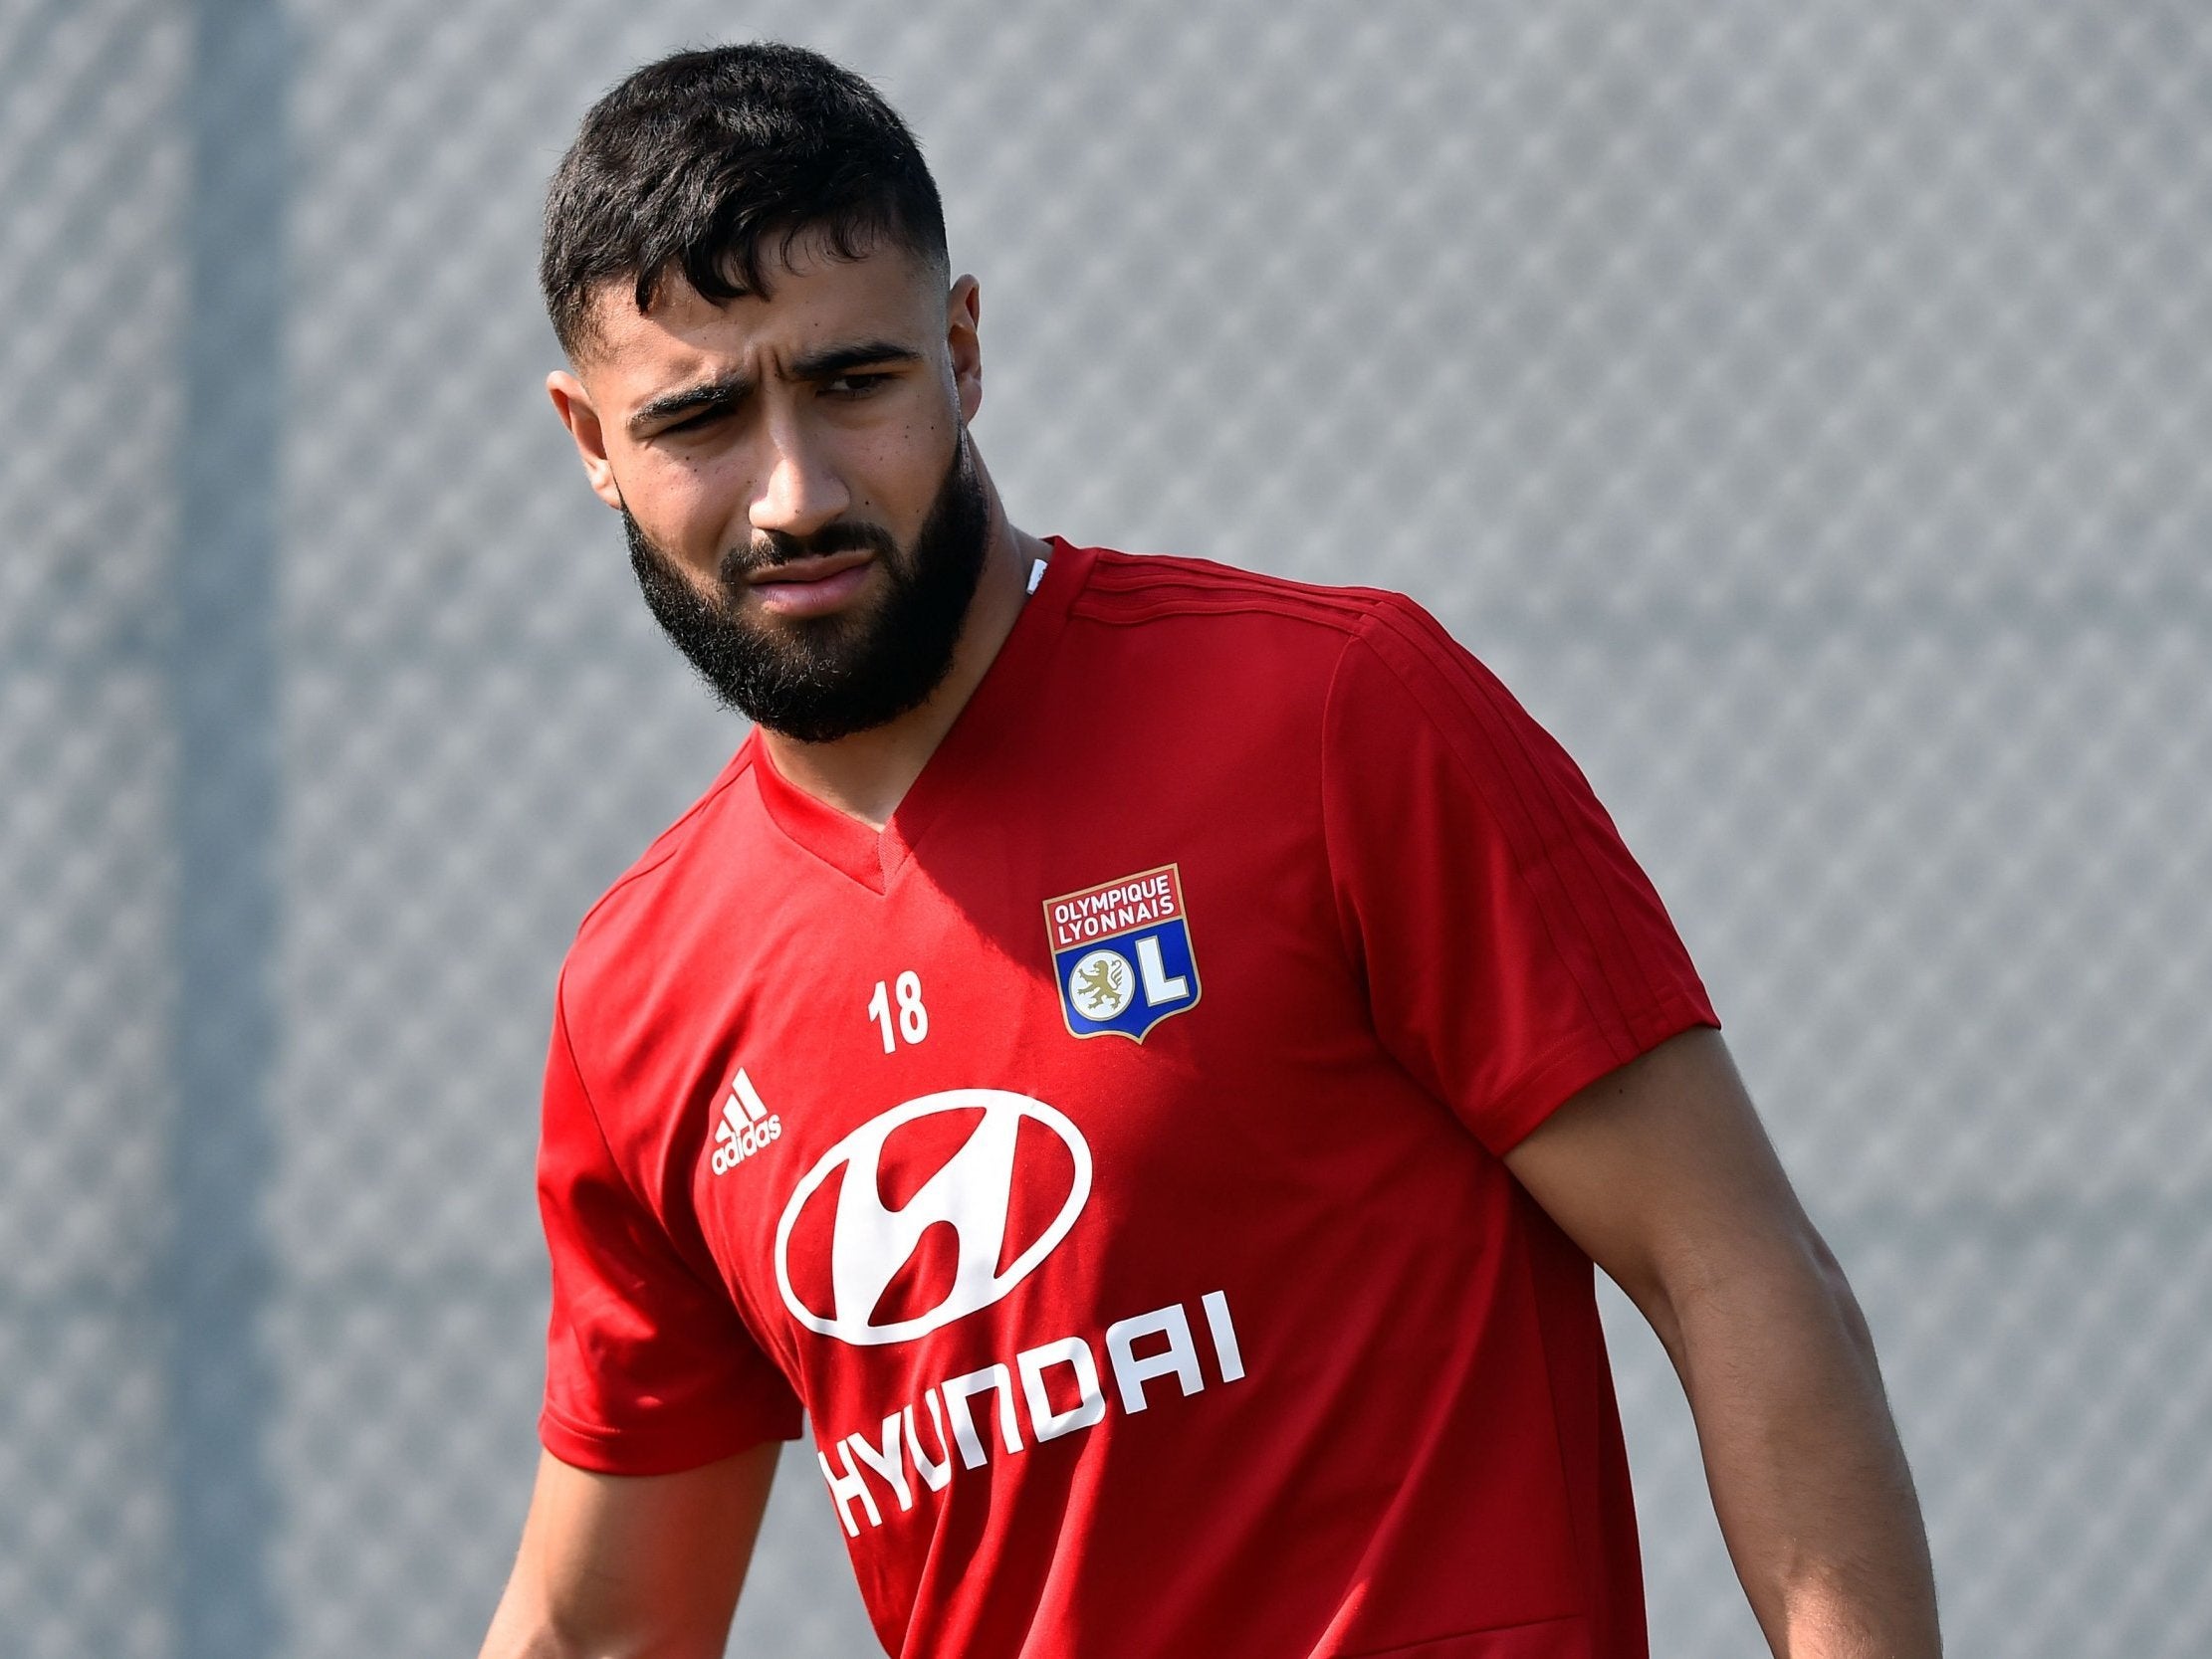 Liverpool transfer news: Nabil Fekir struggling to deal with missing out on summer move, claims Lyon boss